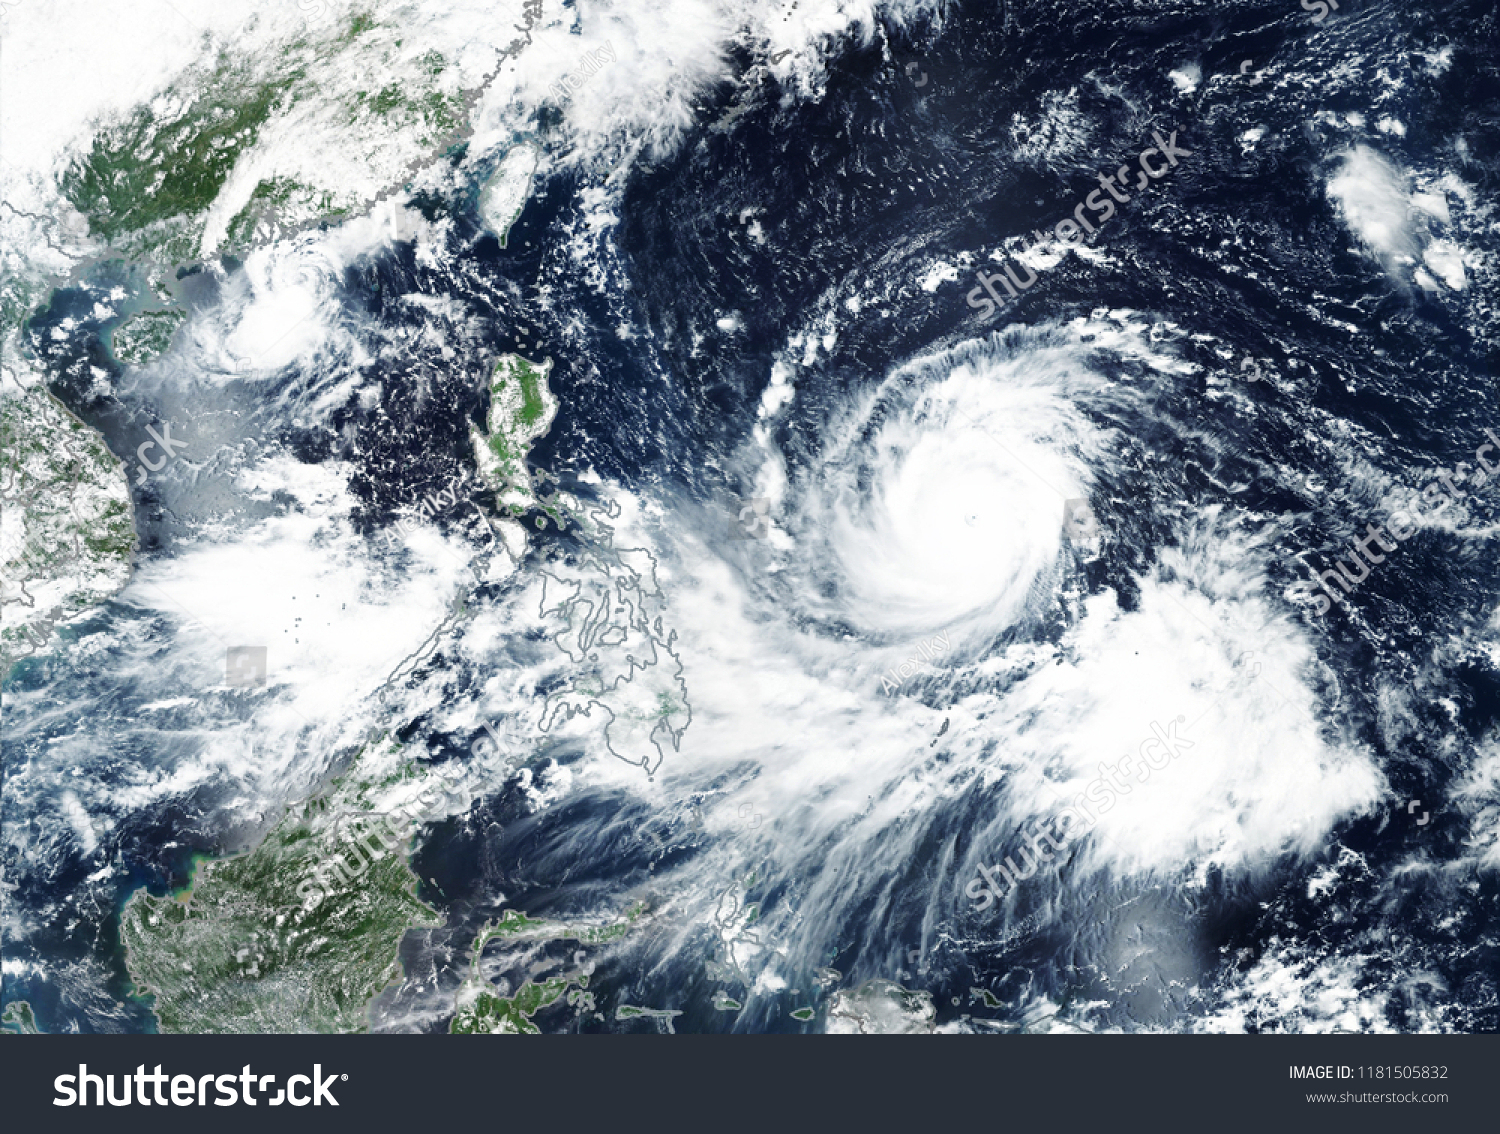 Super Typhoon Mangkhut September 2018 blew into Philippine islands -  All images are altered and improved from elements image furnished by NASA.